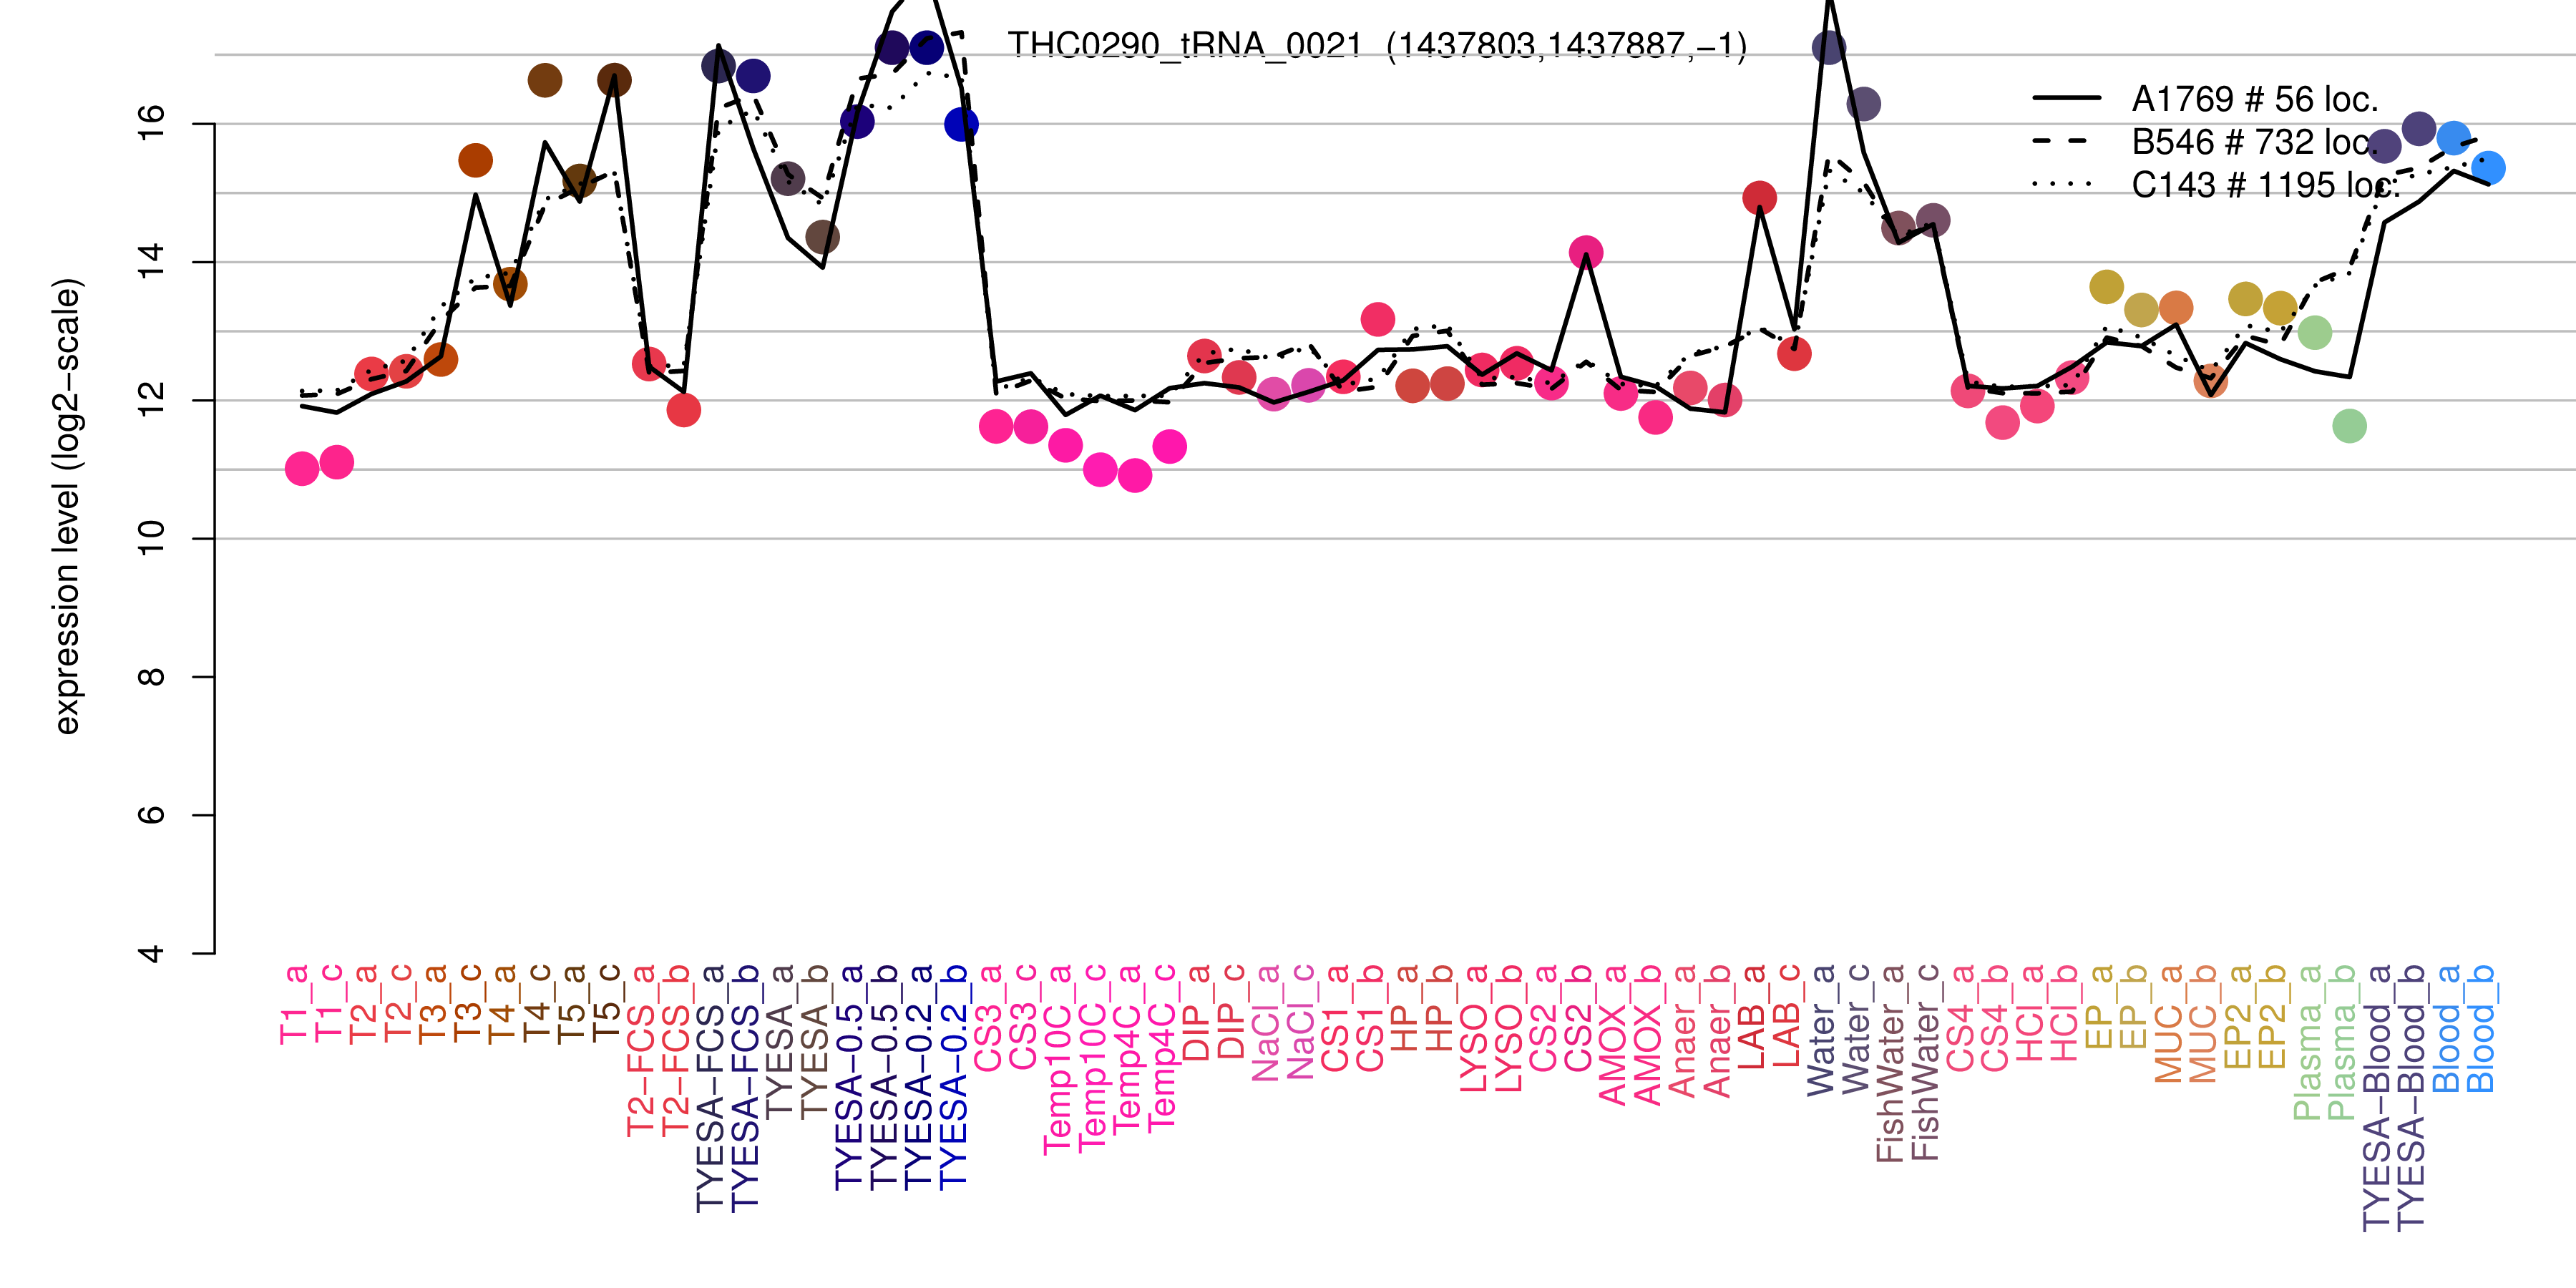 THC0290_tRNA_0021 expression levels among conditions